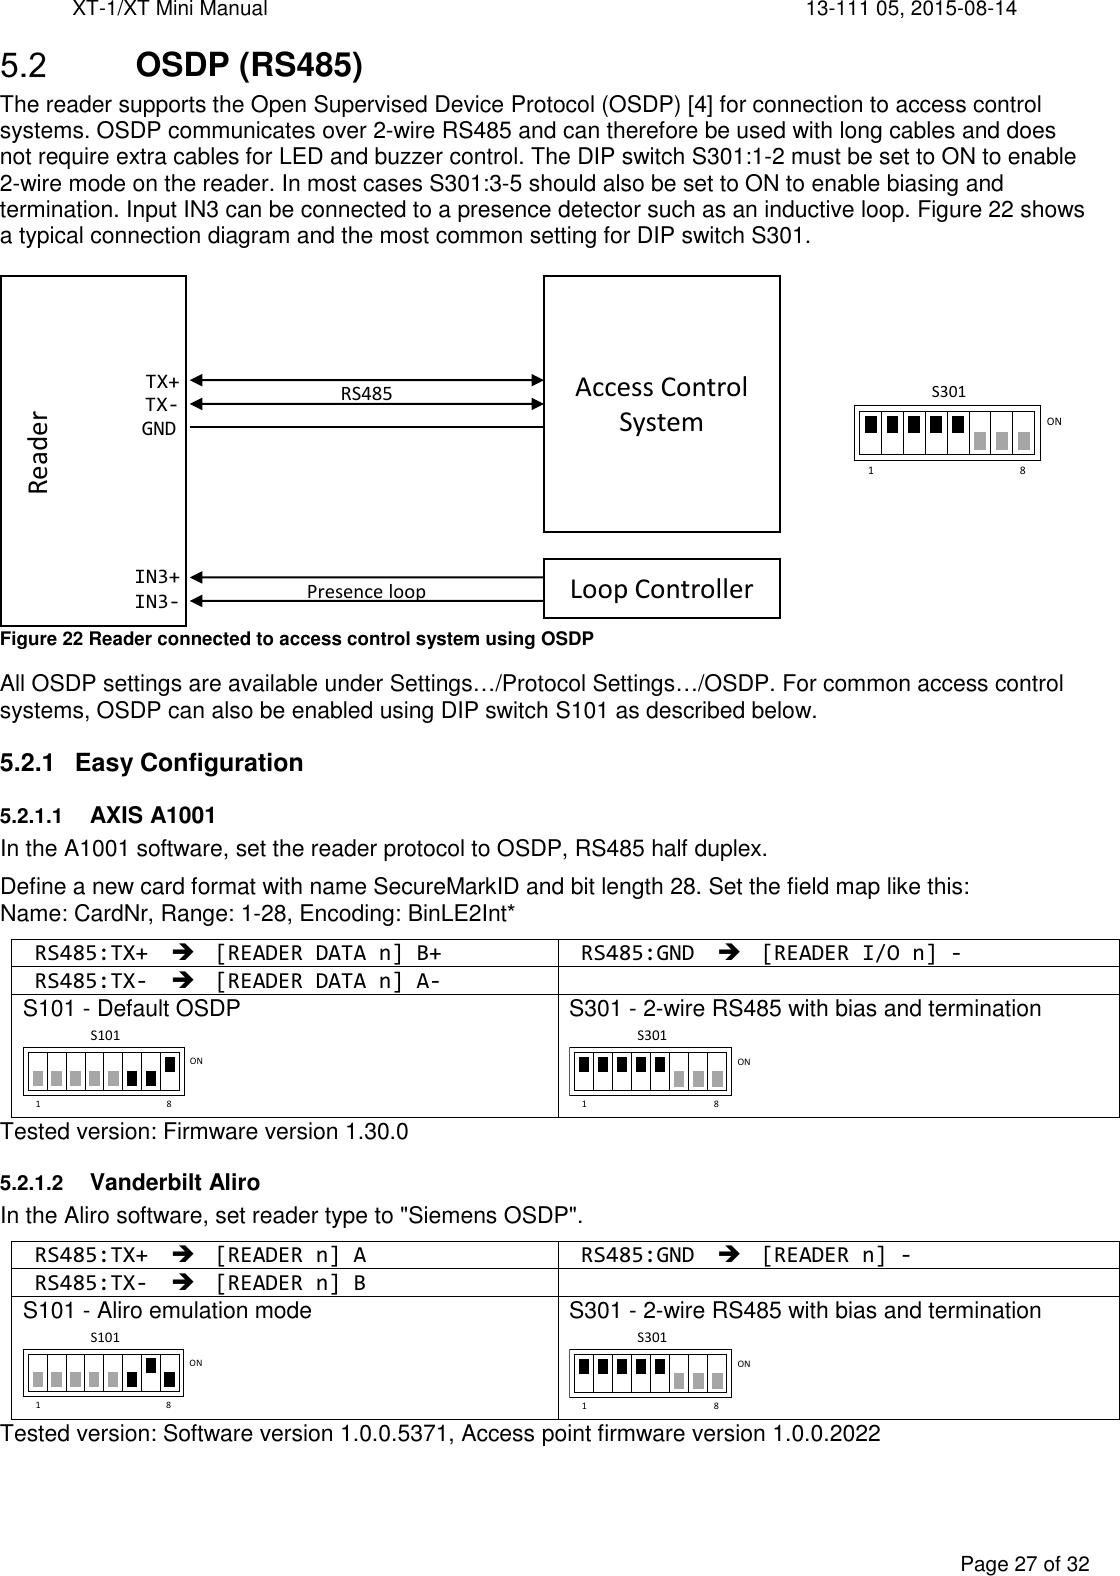 XT-1/XT Mini Manual     13-111 05, 2015-08-14  Page 27 of 32   OSDP (RS485) The reader supports the Open Supervised Device Protocol (OSDP) [4] for connection to access control systems. OSDP communicates over 2-wire RS485 and can therefore be used with long cables and does not require extra cables for LED and buzzer control. The DIP switch S301:1-2 must be set to ON to enable 2-wire mode on the reader. In most cases S301:3-5 should also be set to ON to enable biasing and termination. Input IN3 can be connected to a presence detector such as an inductive loop. Figure 22 shows a typical connection diagram and the most common setting for DIP switch S301.   Figure 22 Reader connected to access control system using OSDP All OSDP settings are available under Settings…/Protocol Settings…/OSDP. For common access control systems, OSDP can also be enabled using DIP switch S101 as described below. 5.2.1  Easy Configuration 5.2.1.1 AXIS A1001 In the A1001 software, set the reader protocol to OSDP, RS485 half duplex. Define a new card format with name SecureMarkID and bit length 28. Set the field map like this:  Name: CardNr, Range: 1-28, Encoding: BinLE2Int* RS485:TX+  [READER DATA n] B+ RS485:GND  [READER I/O n] - RS485:TX-  [READER DATA n] A-    S101 - Default OSDP  S301 - 2-wire RS485 with bias and termination  Tested version: Firmware version 1.30.0 5.2.1.2 Vanderbilt Aliro In the Aliro software, set reader type to &quot;Siemens OSDP&quot;. RS485:TX+  [READER n] A RS485:GND  [READER n] - RS485:TX-  [READER n] B    S101 - Aliro emulation mode  S301 - 2-wire RS485 with bias and termination  Tested version: Software version 1.0.0.5371, Access point firmware version 1.0.0.2022   RS485TX+TX-GNDReaderIN3+IN3- Presence loopAccess Control SystemLoop Controller1 8ONS1011 8ONS3011 8ONS1011 8ONS3011 8ONS301